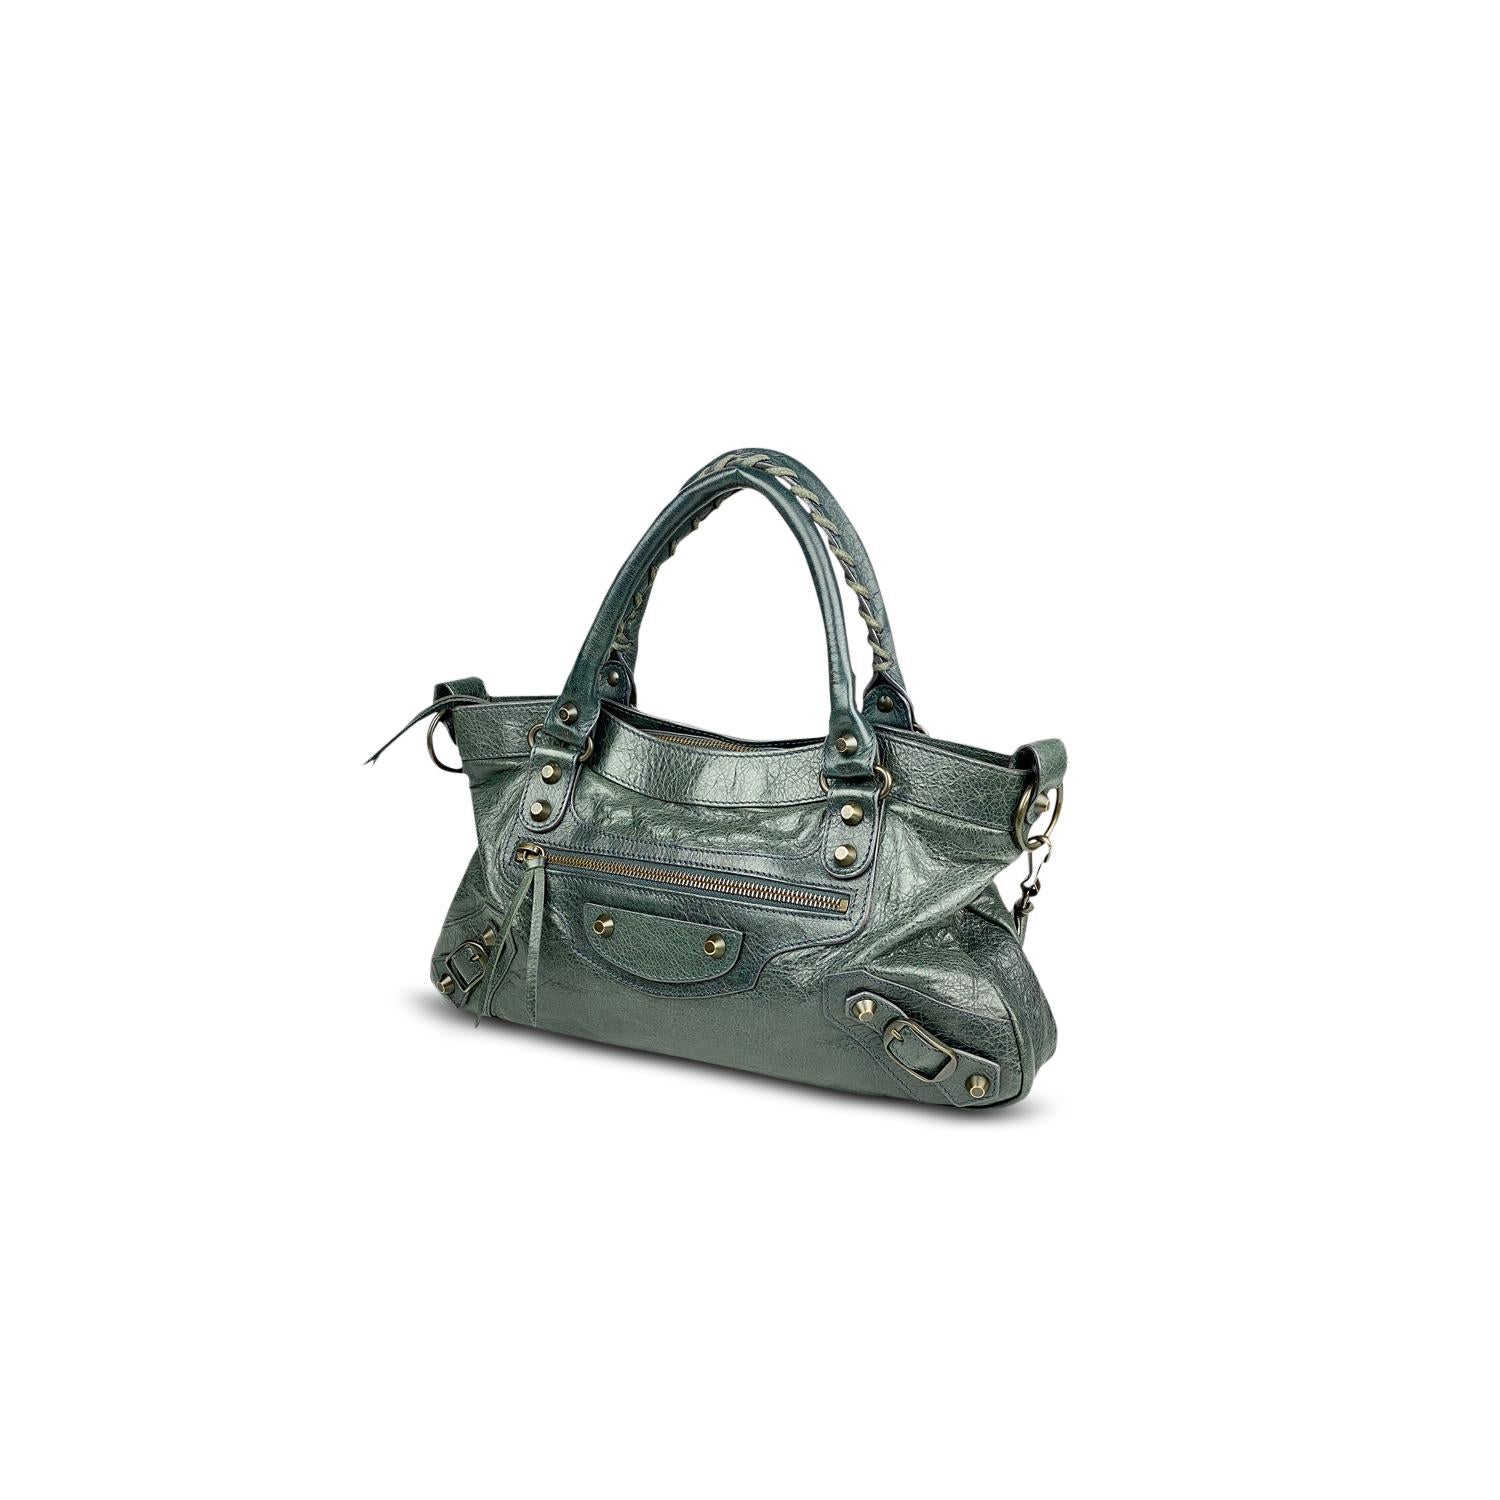 Grey leather Balenciaga Motocross Classic First bag with

- Aged Brass Hardware
- Tonal leather trim
- Dual rolled top handles with whipstitch trim
- Single detachable shoulder strap
- Single zip pocket at front
- Black woven lining, three pockets